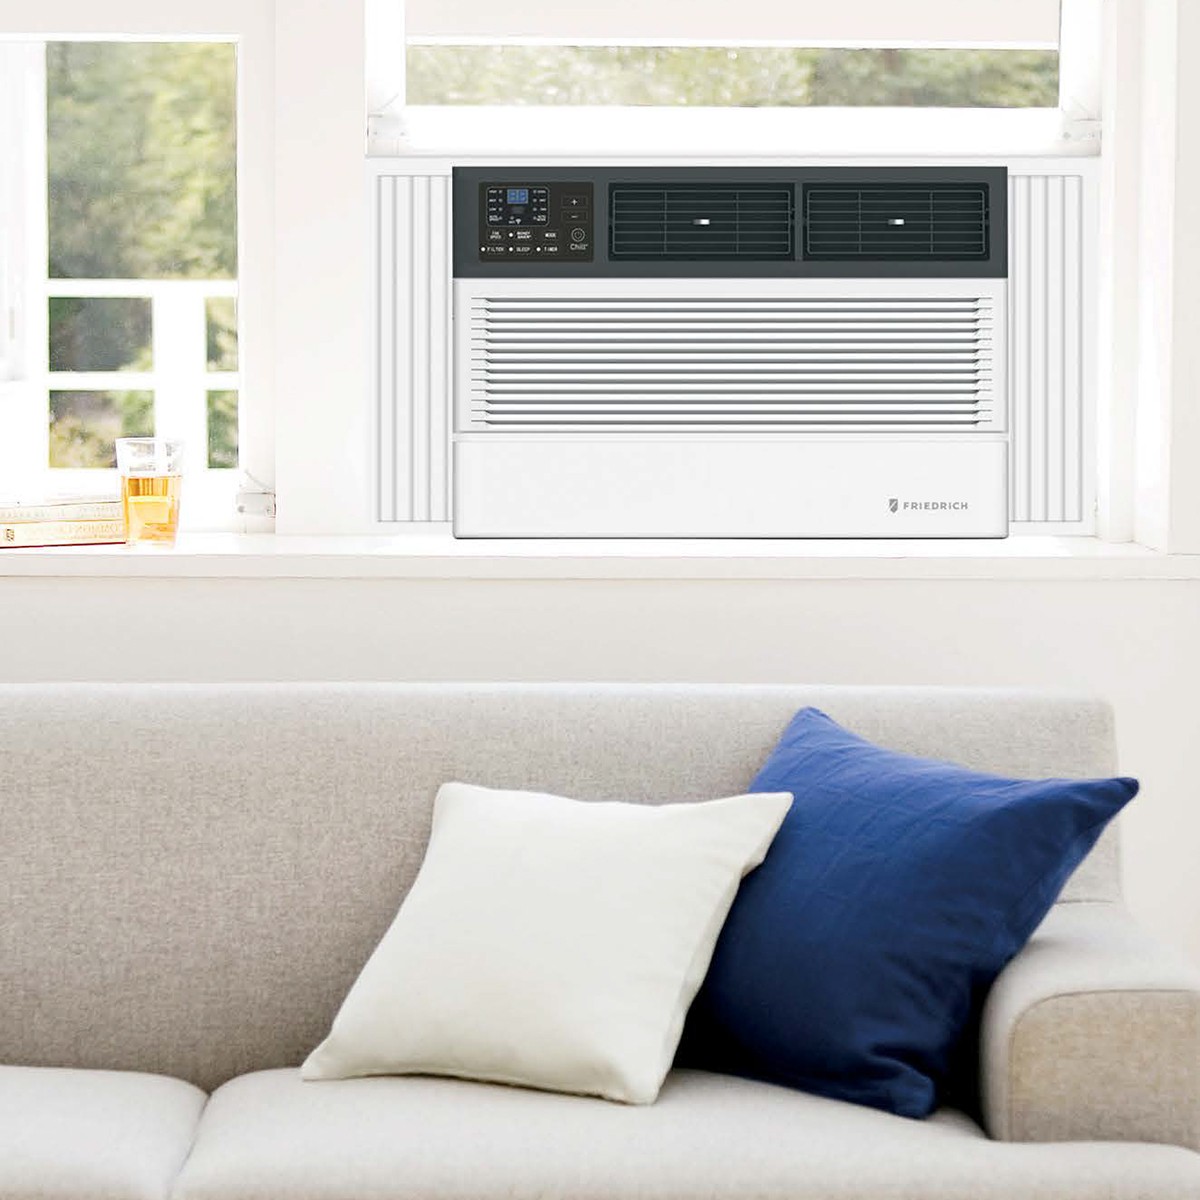 Cool Living 5000 BTU Window Air Conditioner, 1 ct - Fry's Food Stores